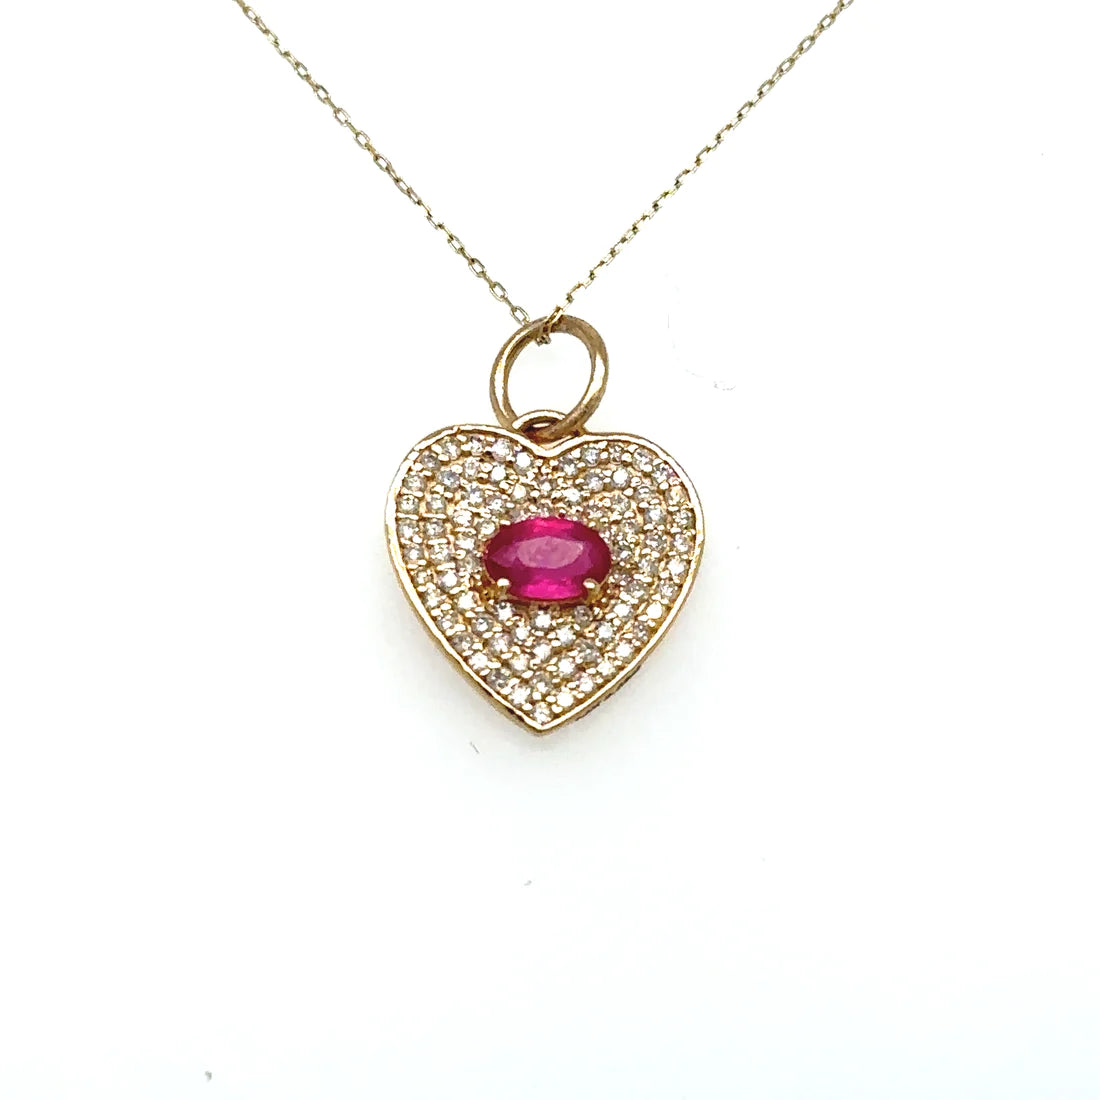 Heart Pendant With Ruby and Diamonds